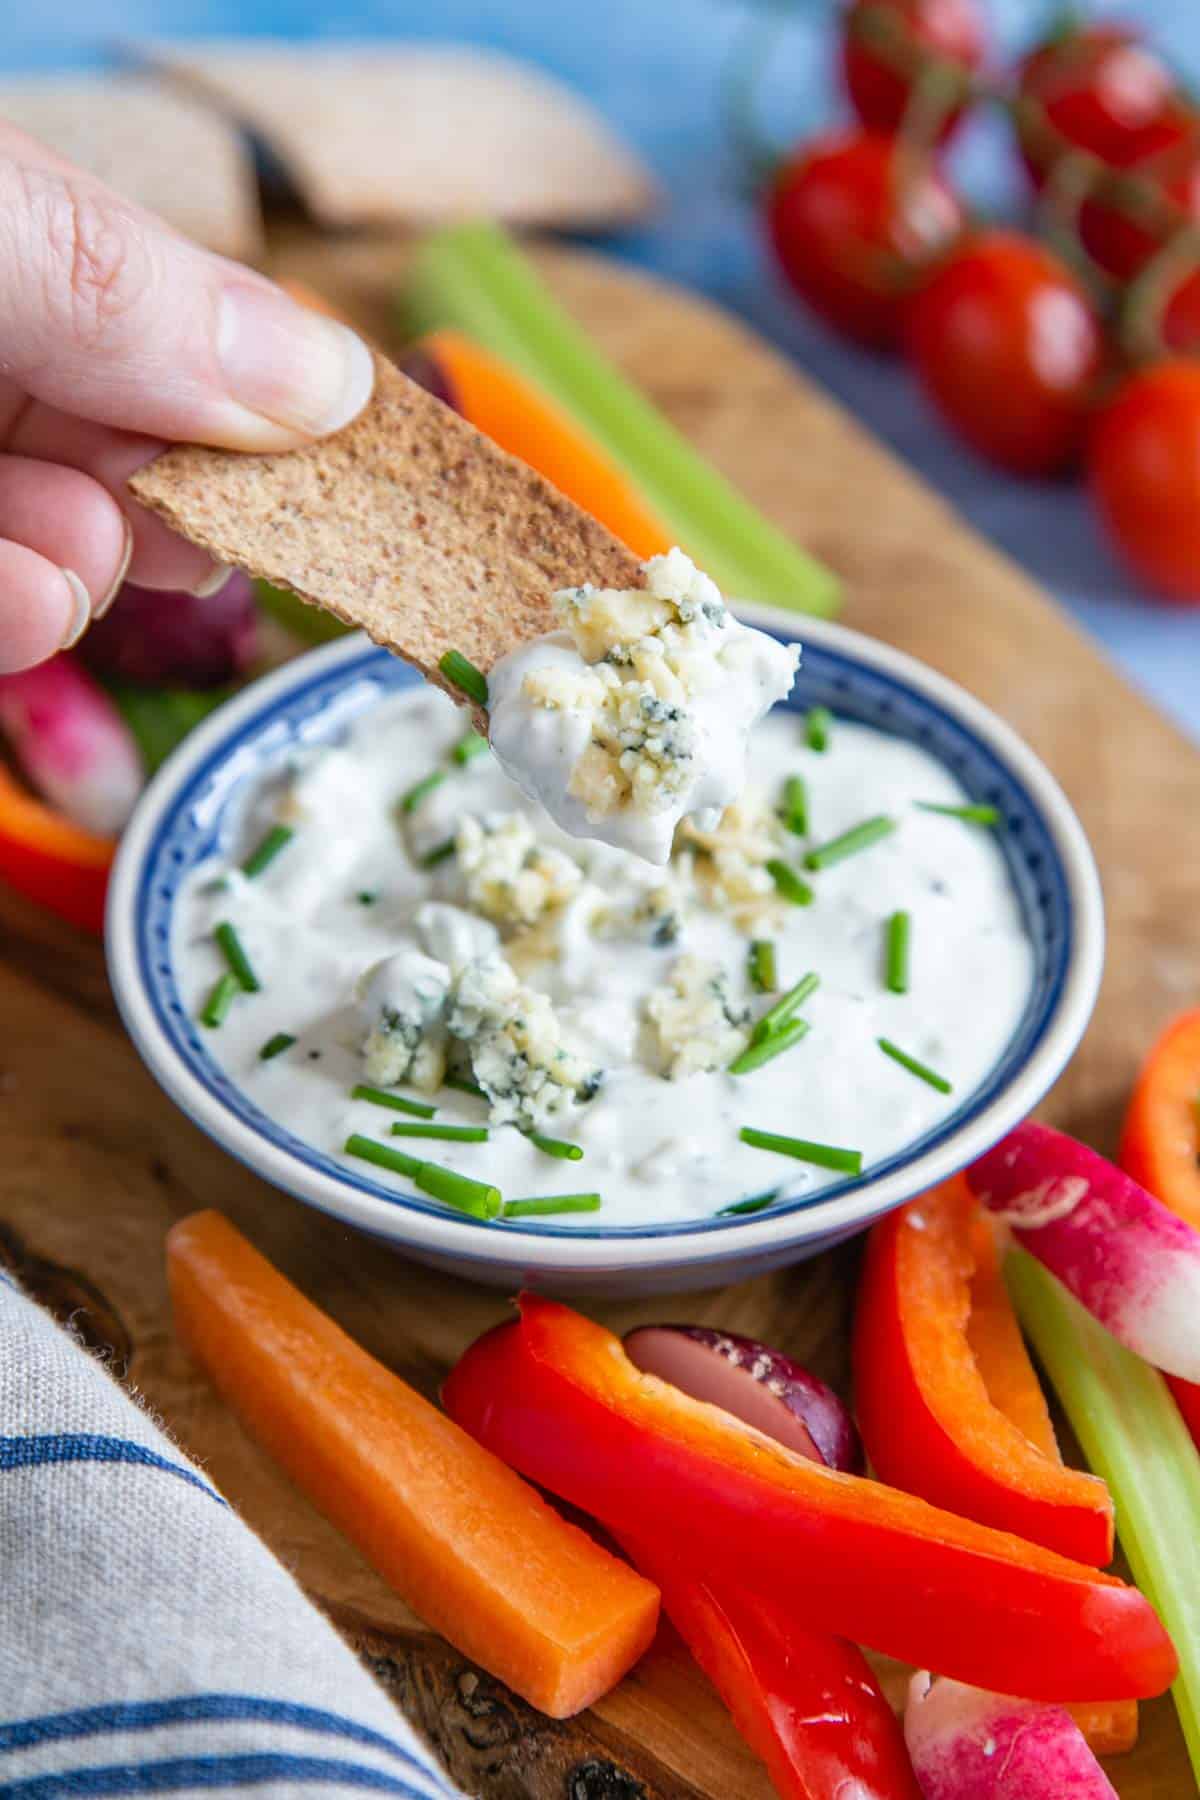 Blue cheese dip with crackers and crudités